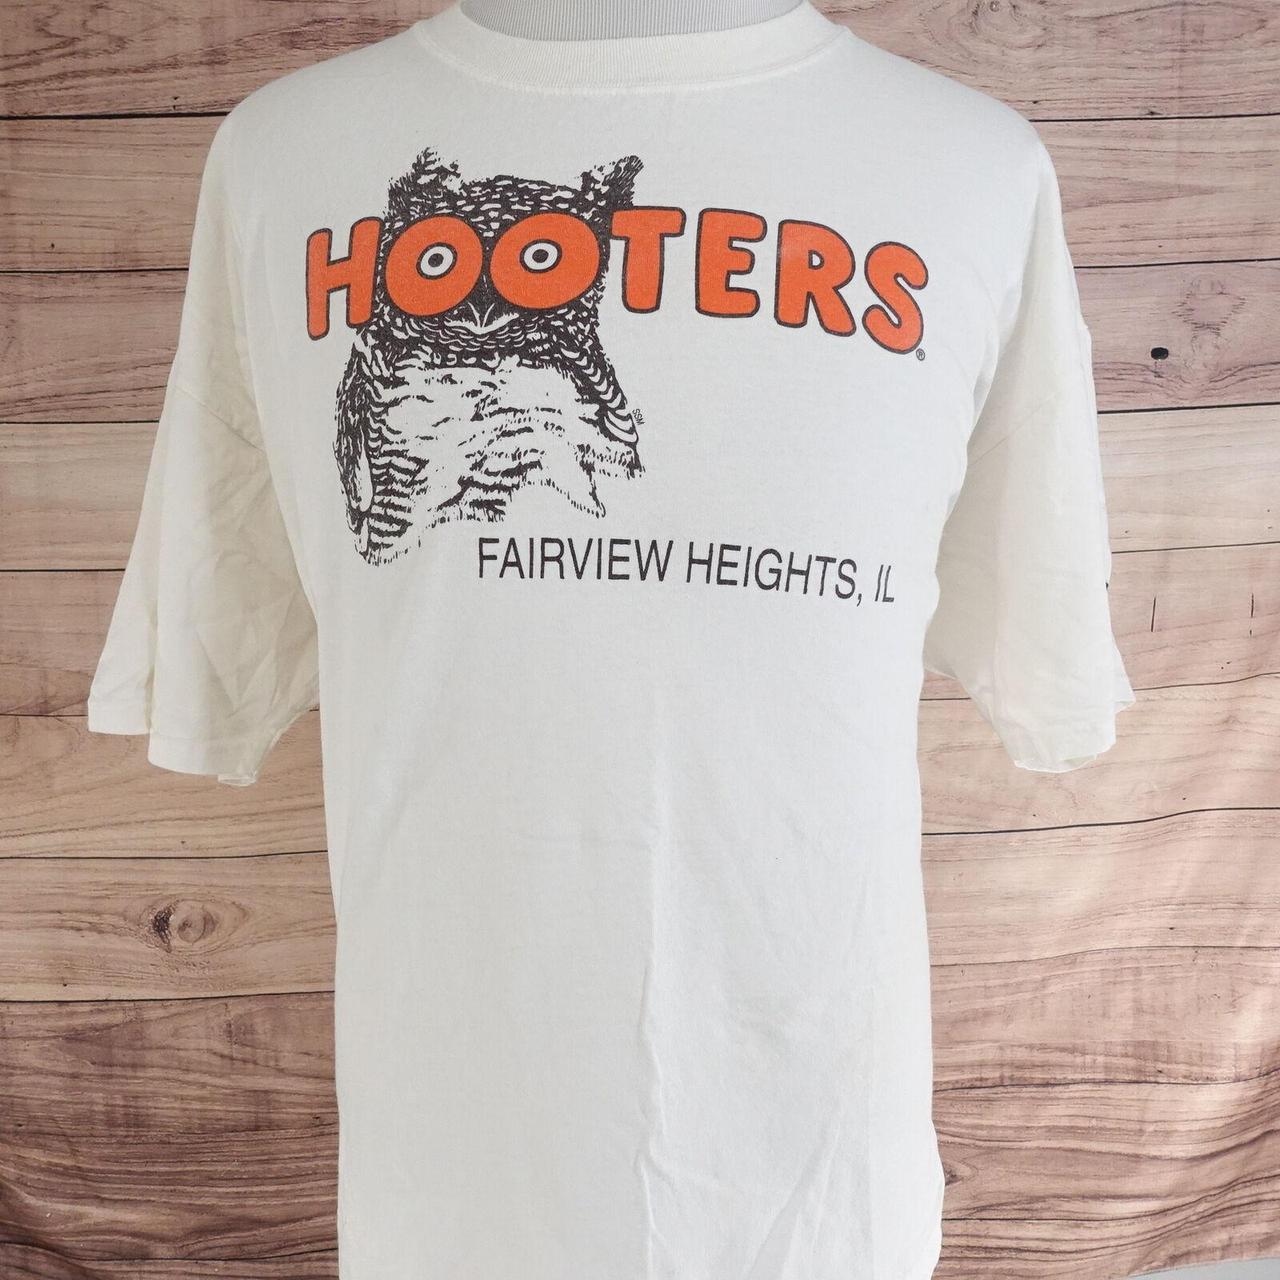 2003 HOOTERS FAIRVIEW HEIGHTS IL 20th ANNIVERSARY... - Depop